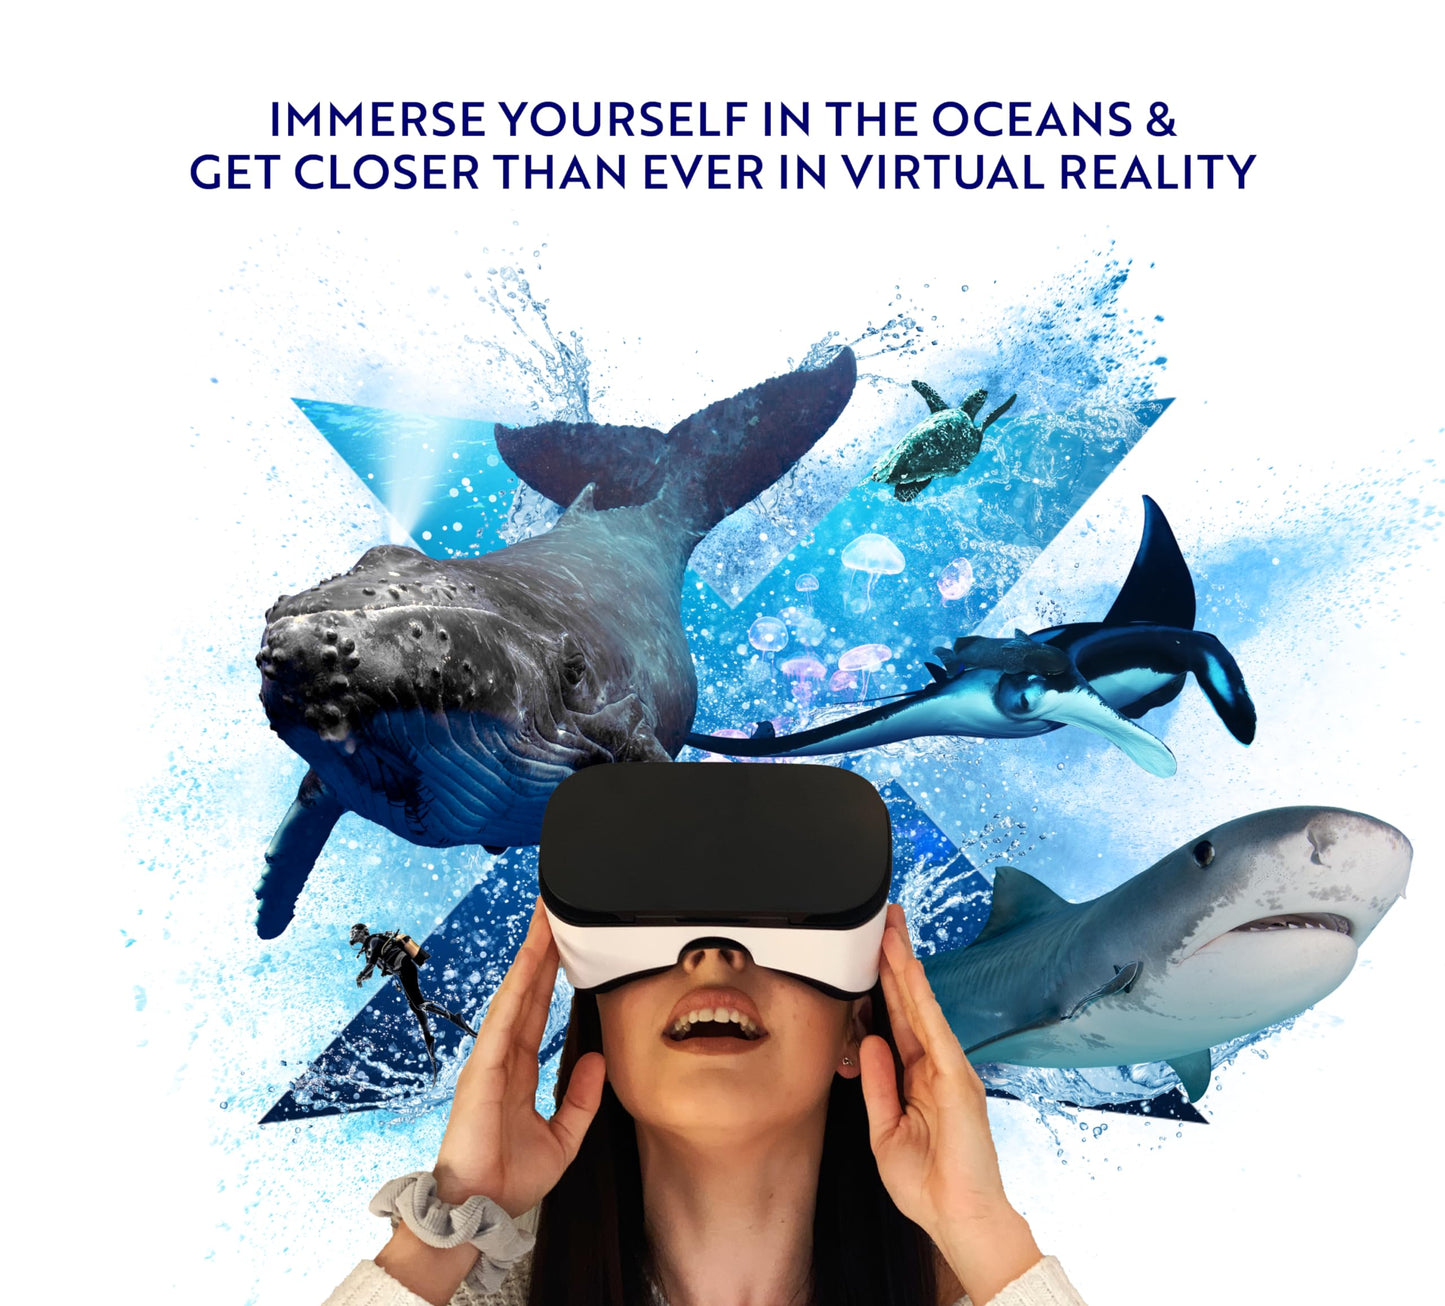 Let's Explore Oceans VR Headset for Kids - A Virtual Reality Family Friendly Adventure to Swim with Whales, Sharks, and Encounter Polar Bears Through Augmented Reality and Smartphone Compatibility